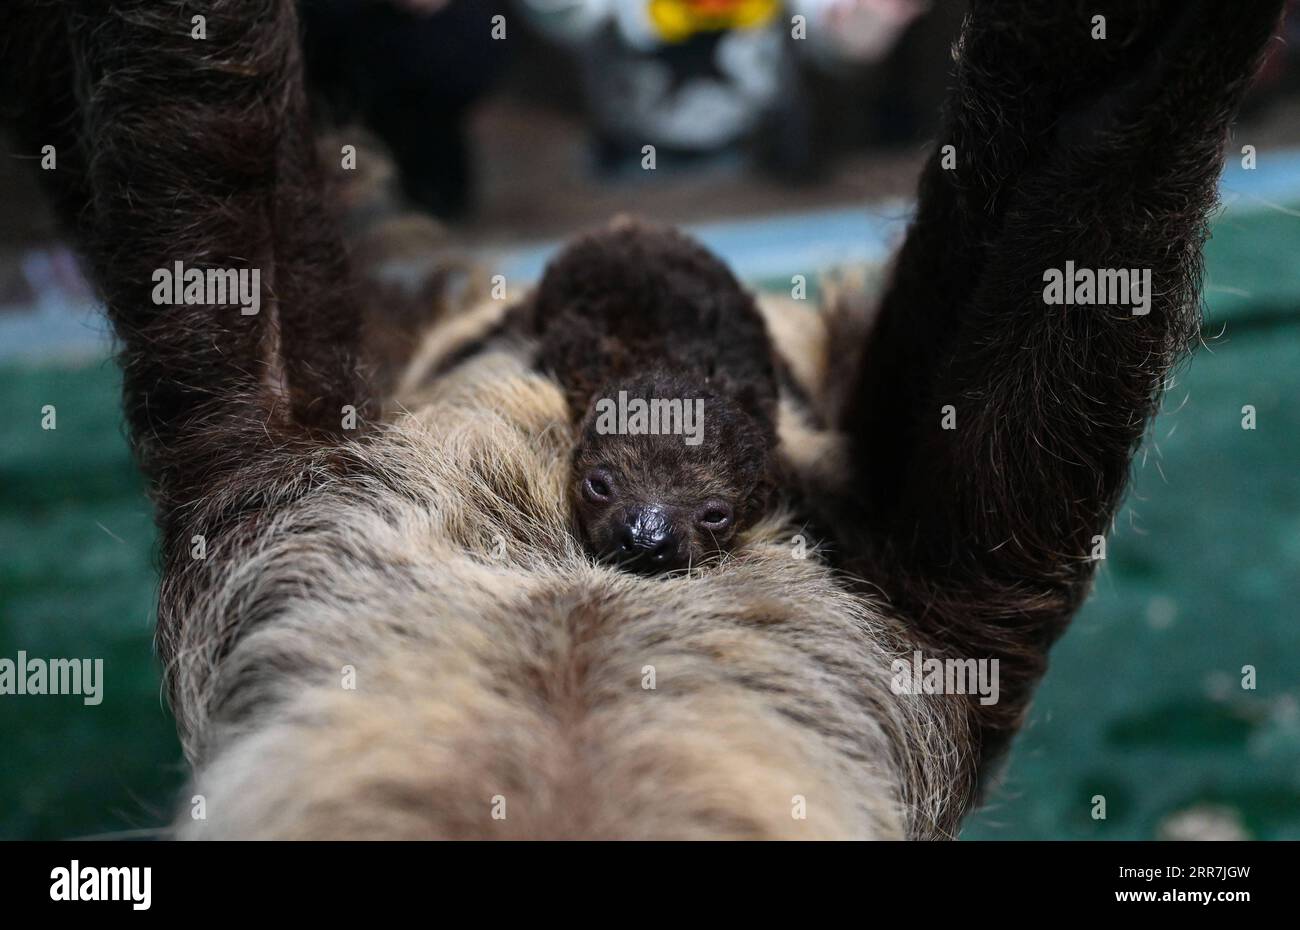 210330 -- HEFEI, March 30, 2021 -- A sloth baby is seen with its mom at the Hefei aquarium in Hefei, capital of east China s Anhui Province, March 30, 2021. The sloth baby, born on Feb. 27 this year in Hefei, met with the public after being taken care of for one month. The baby is the first naturally-born sloth in an artificial feeding environment in Anhui.  CHINA-ANHUI-HEFEI-SLOTH BABY-PUBLIC CN HanxXu PUBLICATIONxNOTxINxCHN Stock Photo